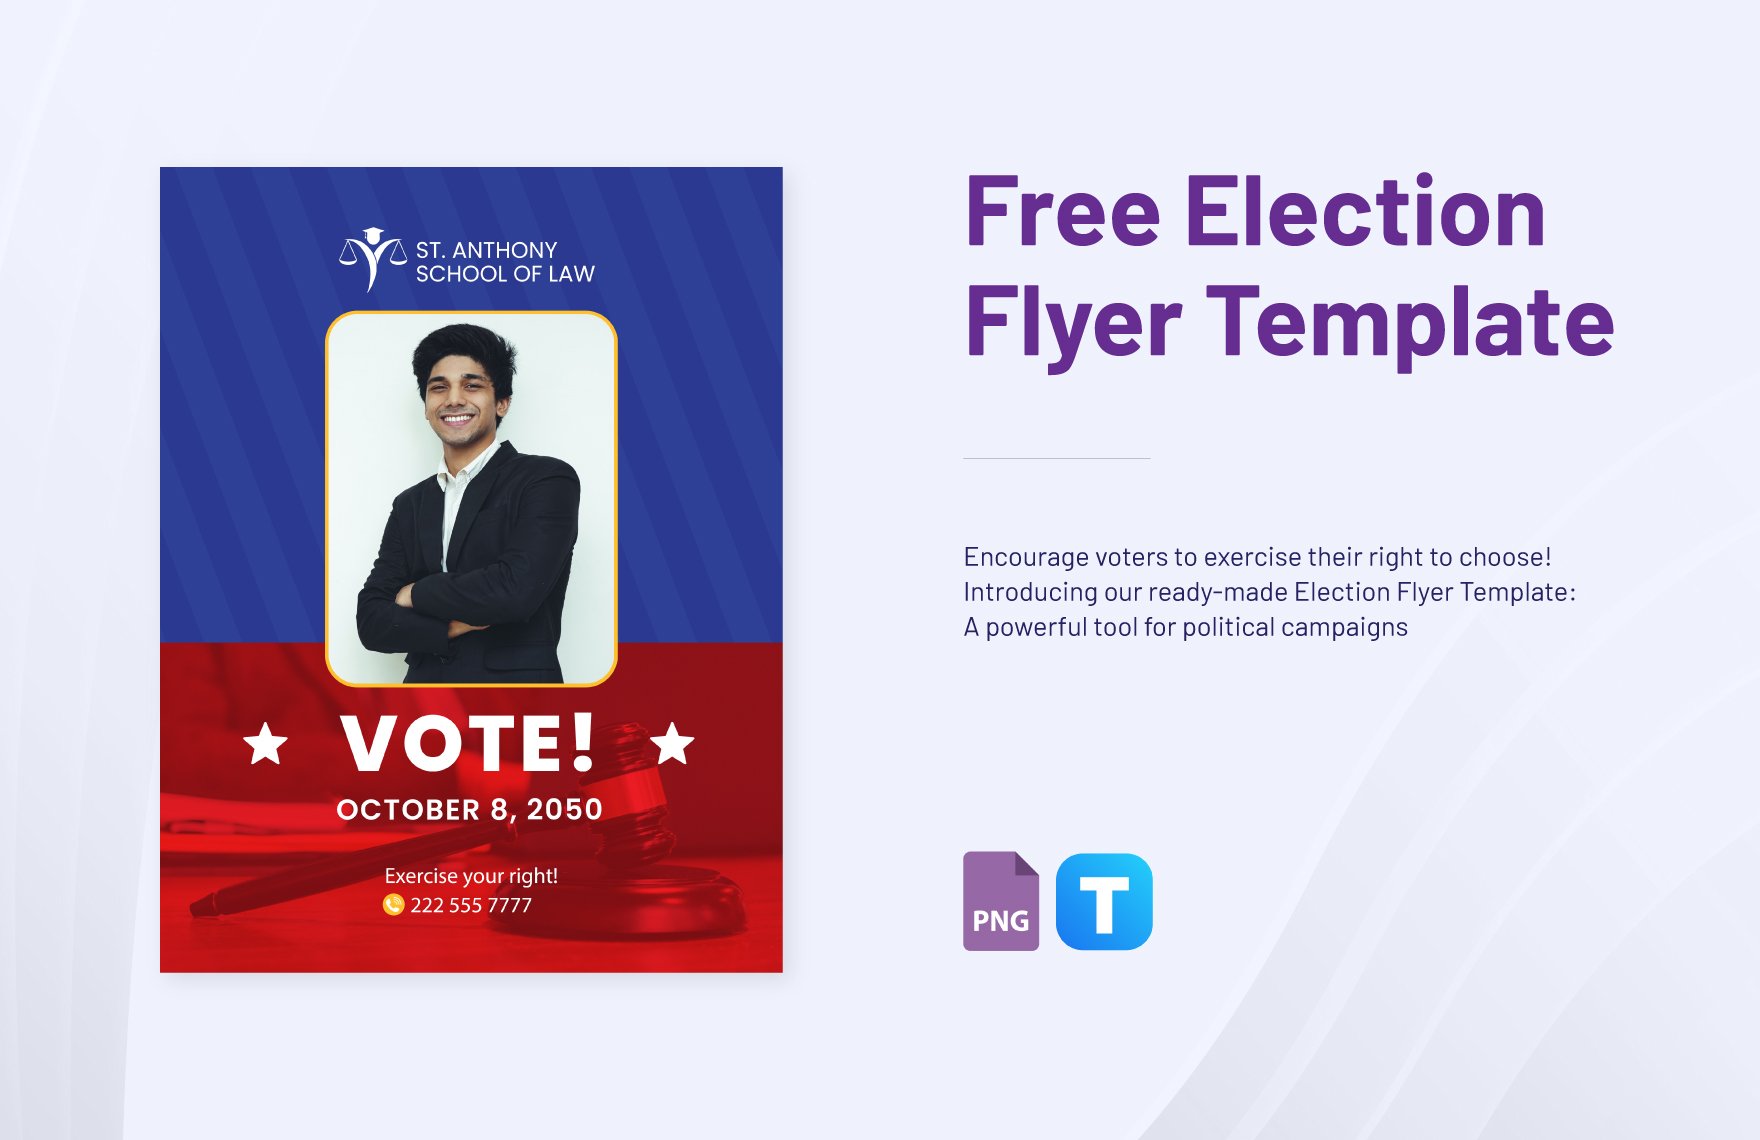 Election Flyer Template in PNG